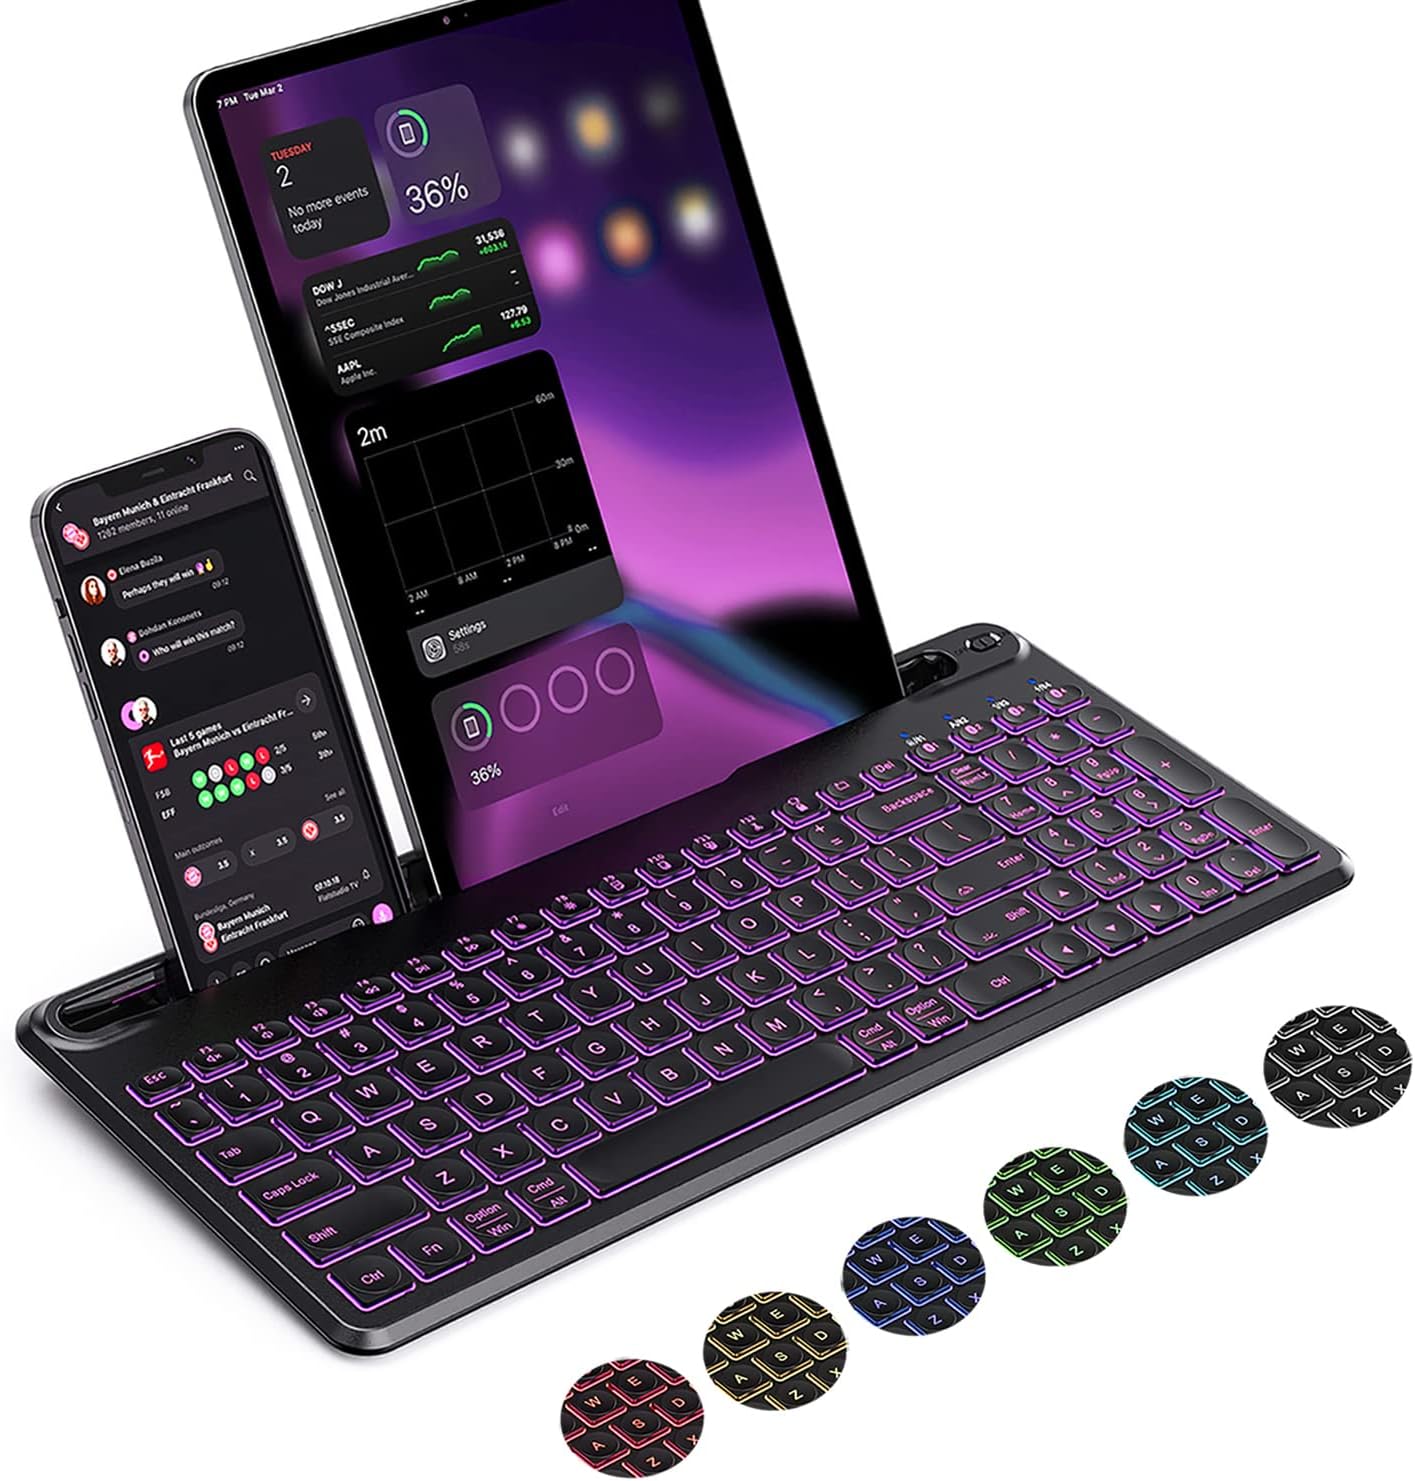 Multi-Device Bluetooth Keyboard for Tablet Phone Computer - Wireless Illuminated Rechargeable Keyboard with Number Pad Connect Up to 4 Devices Compatible Mac Android iOS Windows